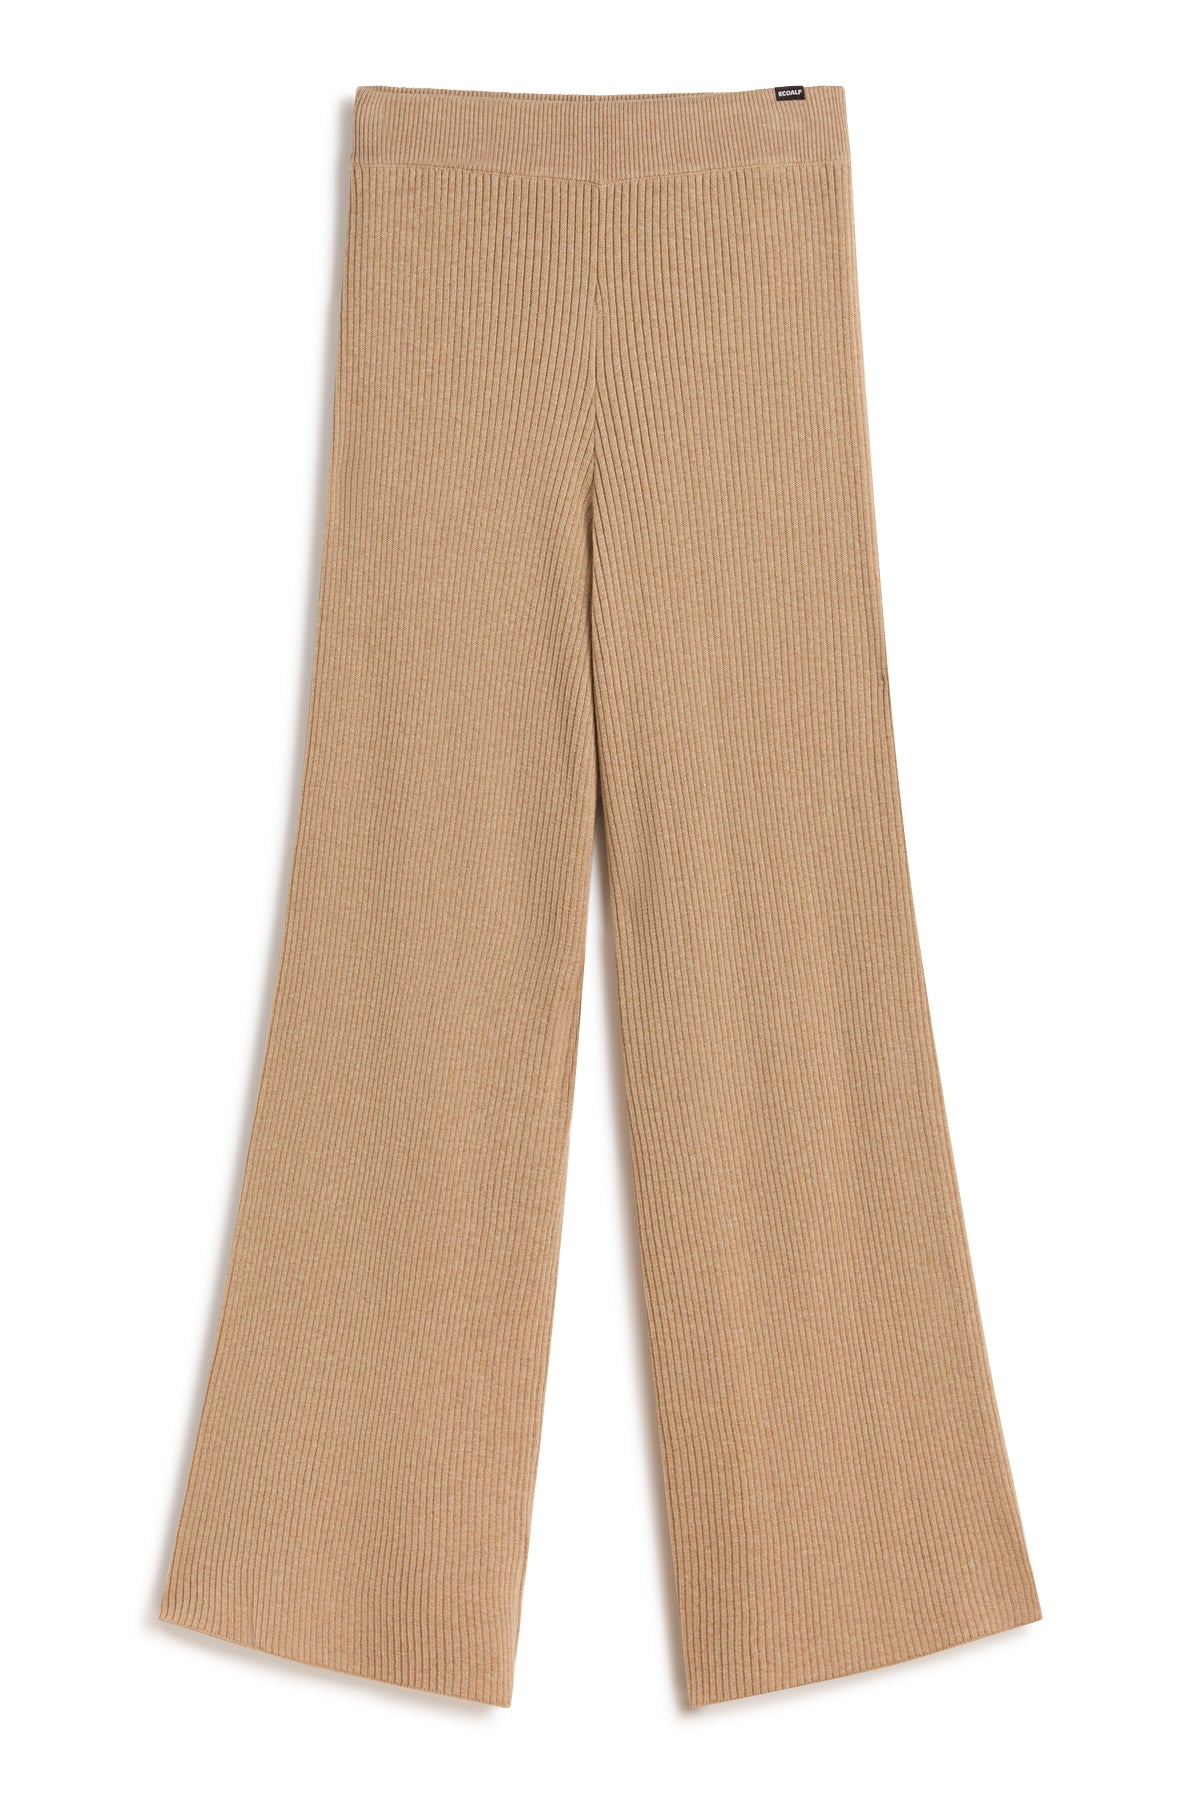 BROWN CIPRE TROUSERS 